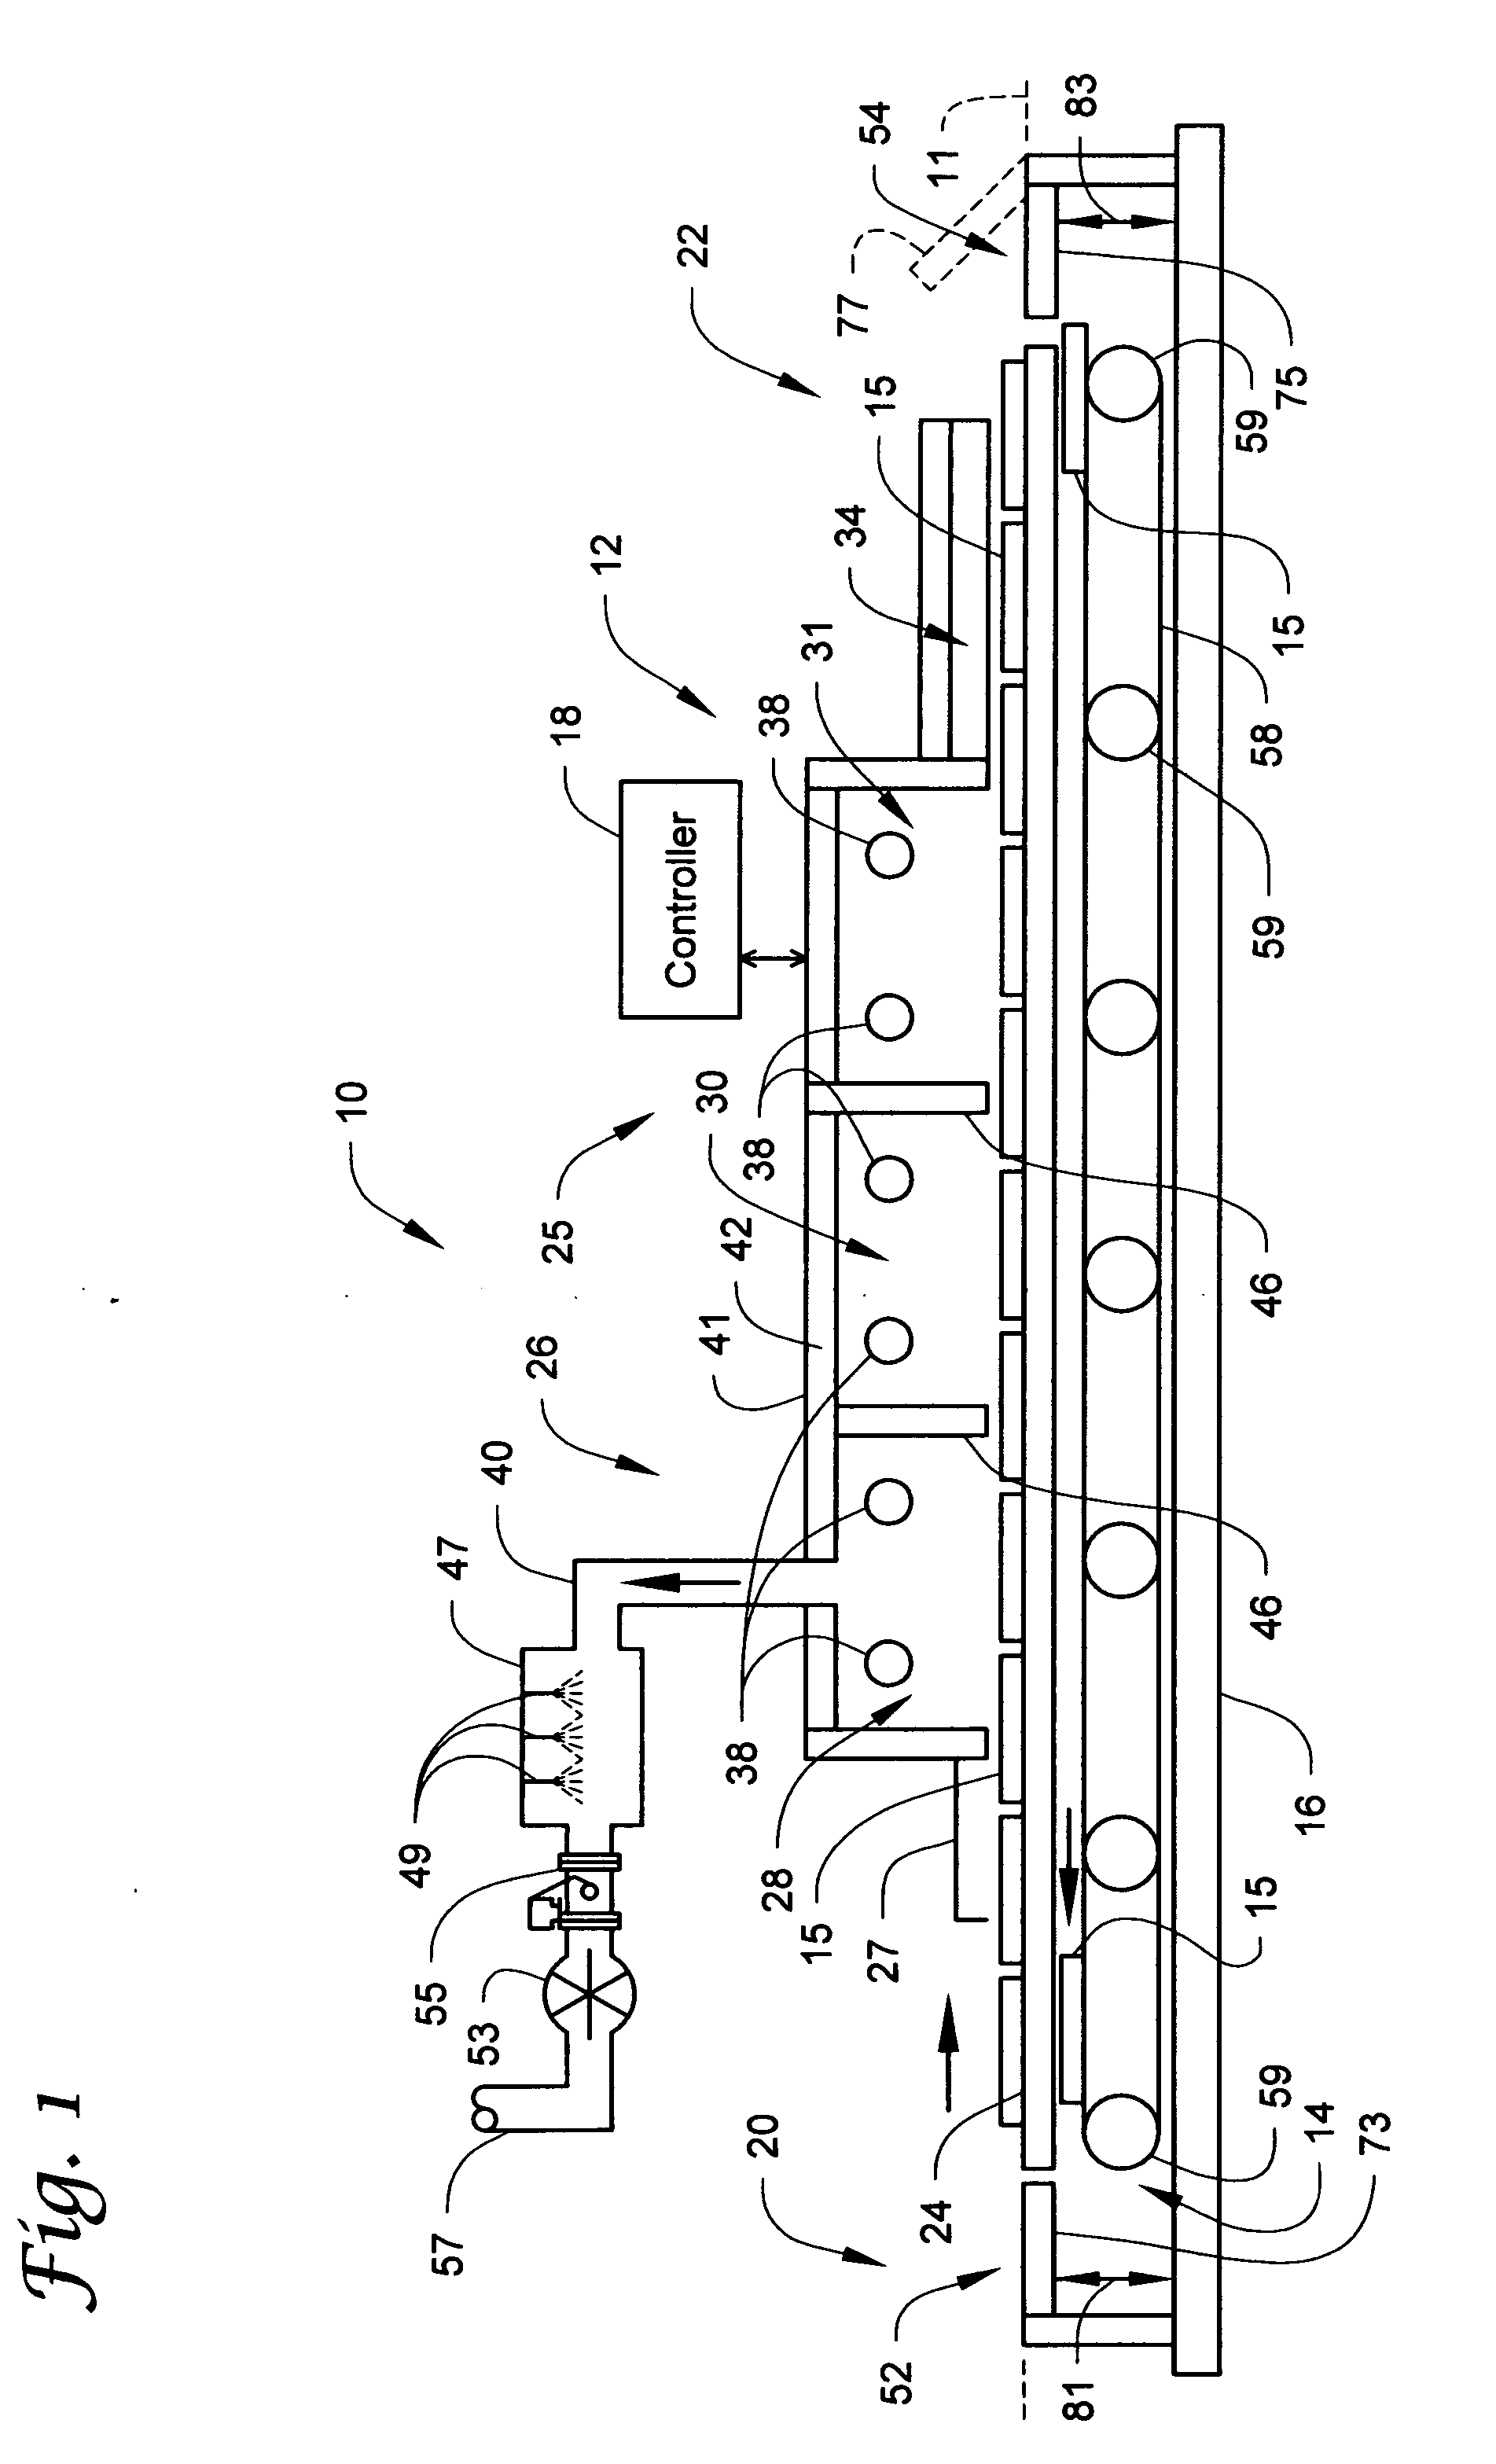 Linear hearth furnace system and methods regarding same